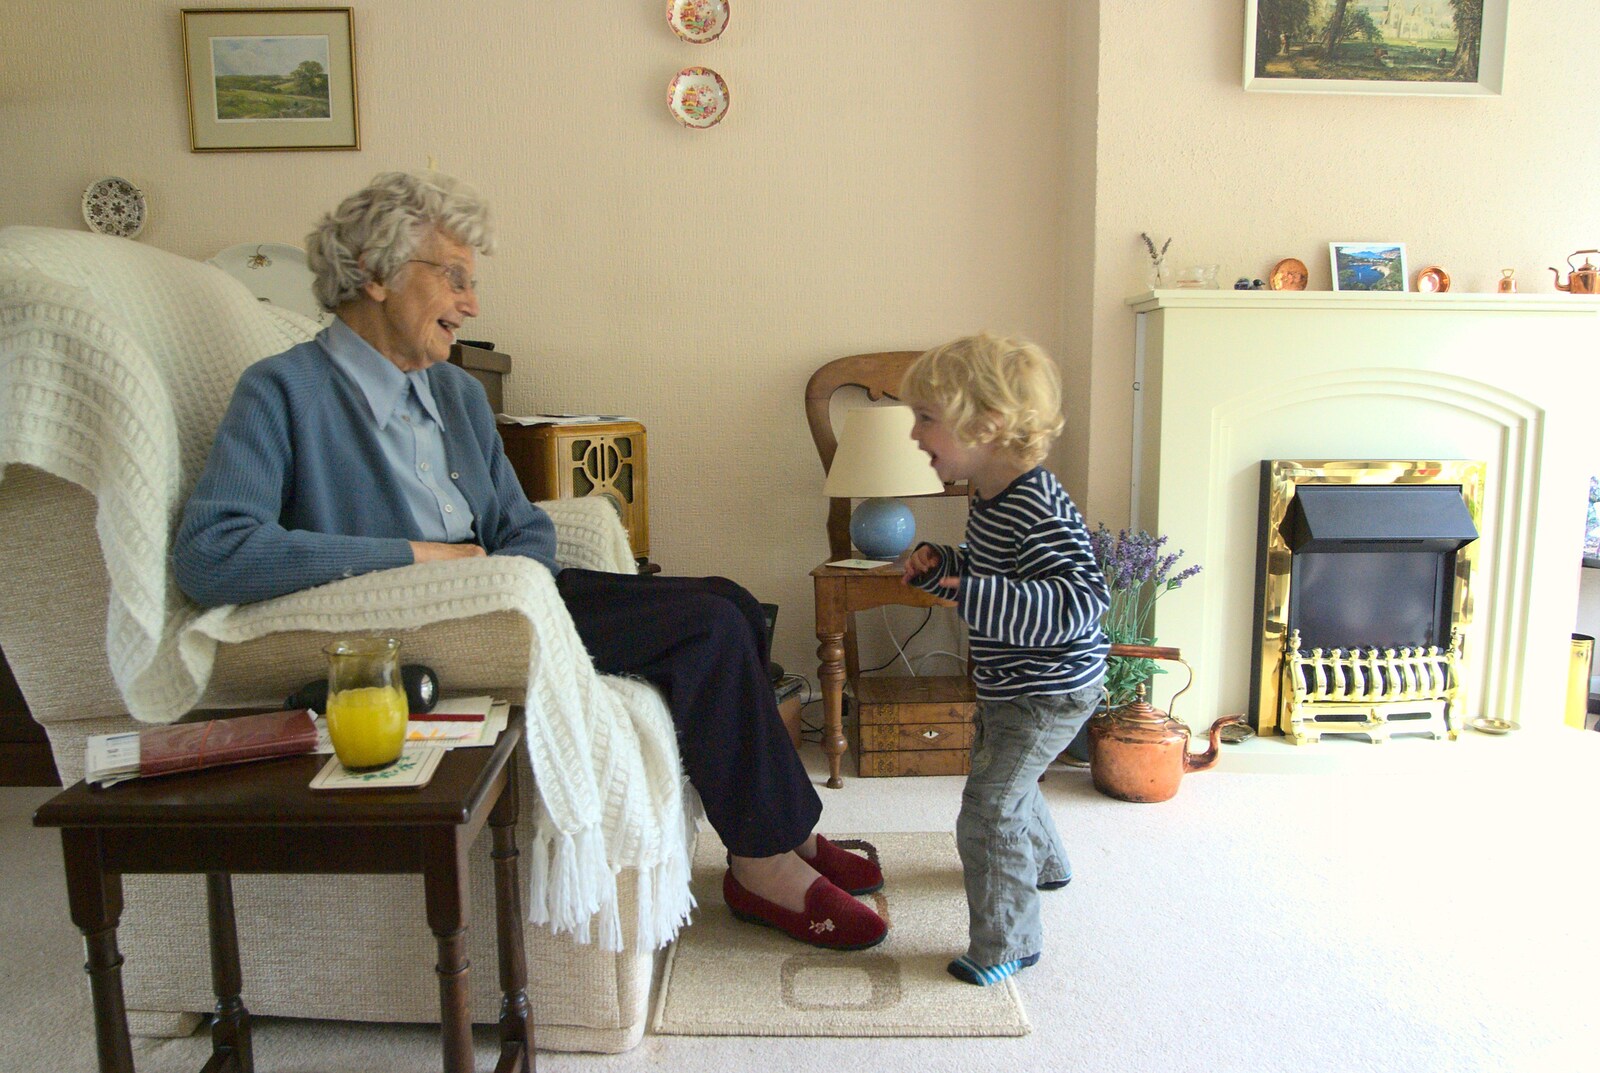 Fred runs up to his great-grandmother from A Camper Van Odyssey: Oxford, Salisbury, New Forest and Barton-on-Sea - 19th June 2011